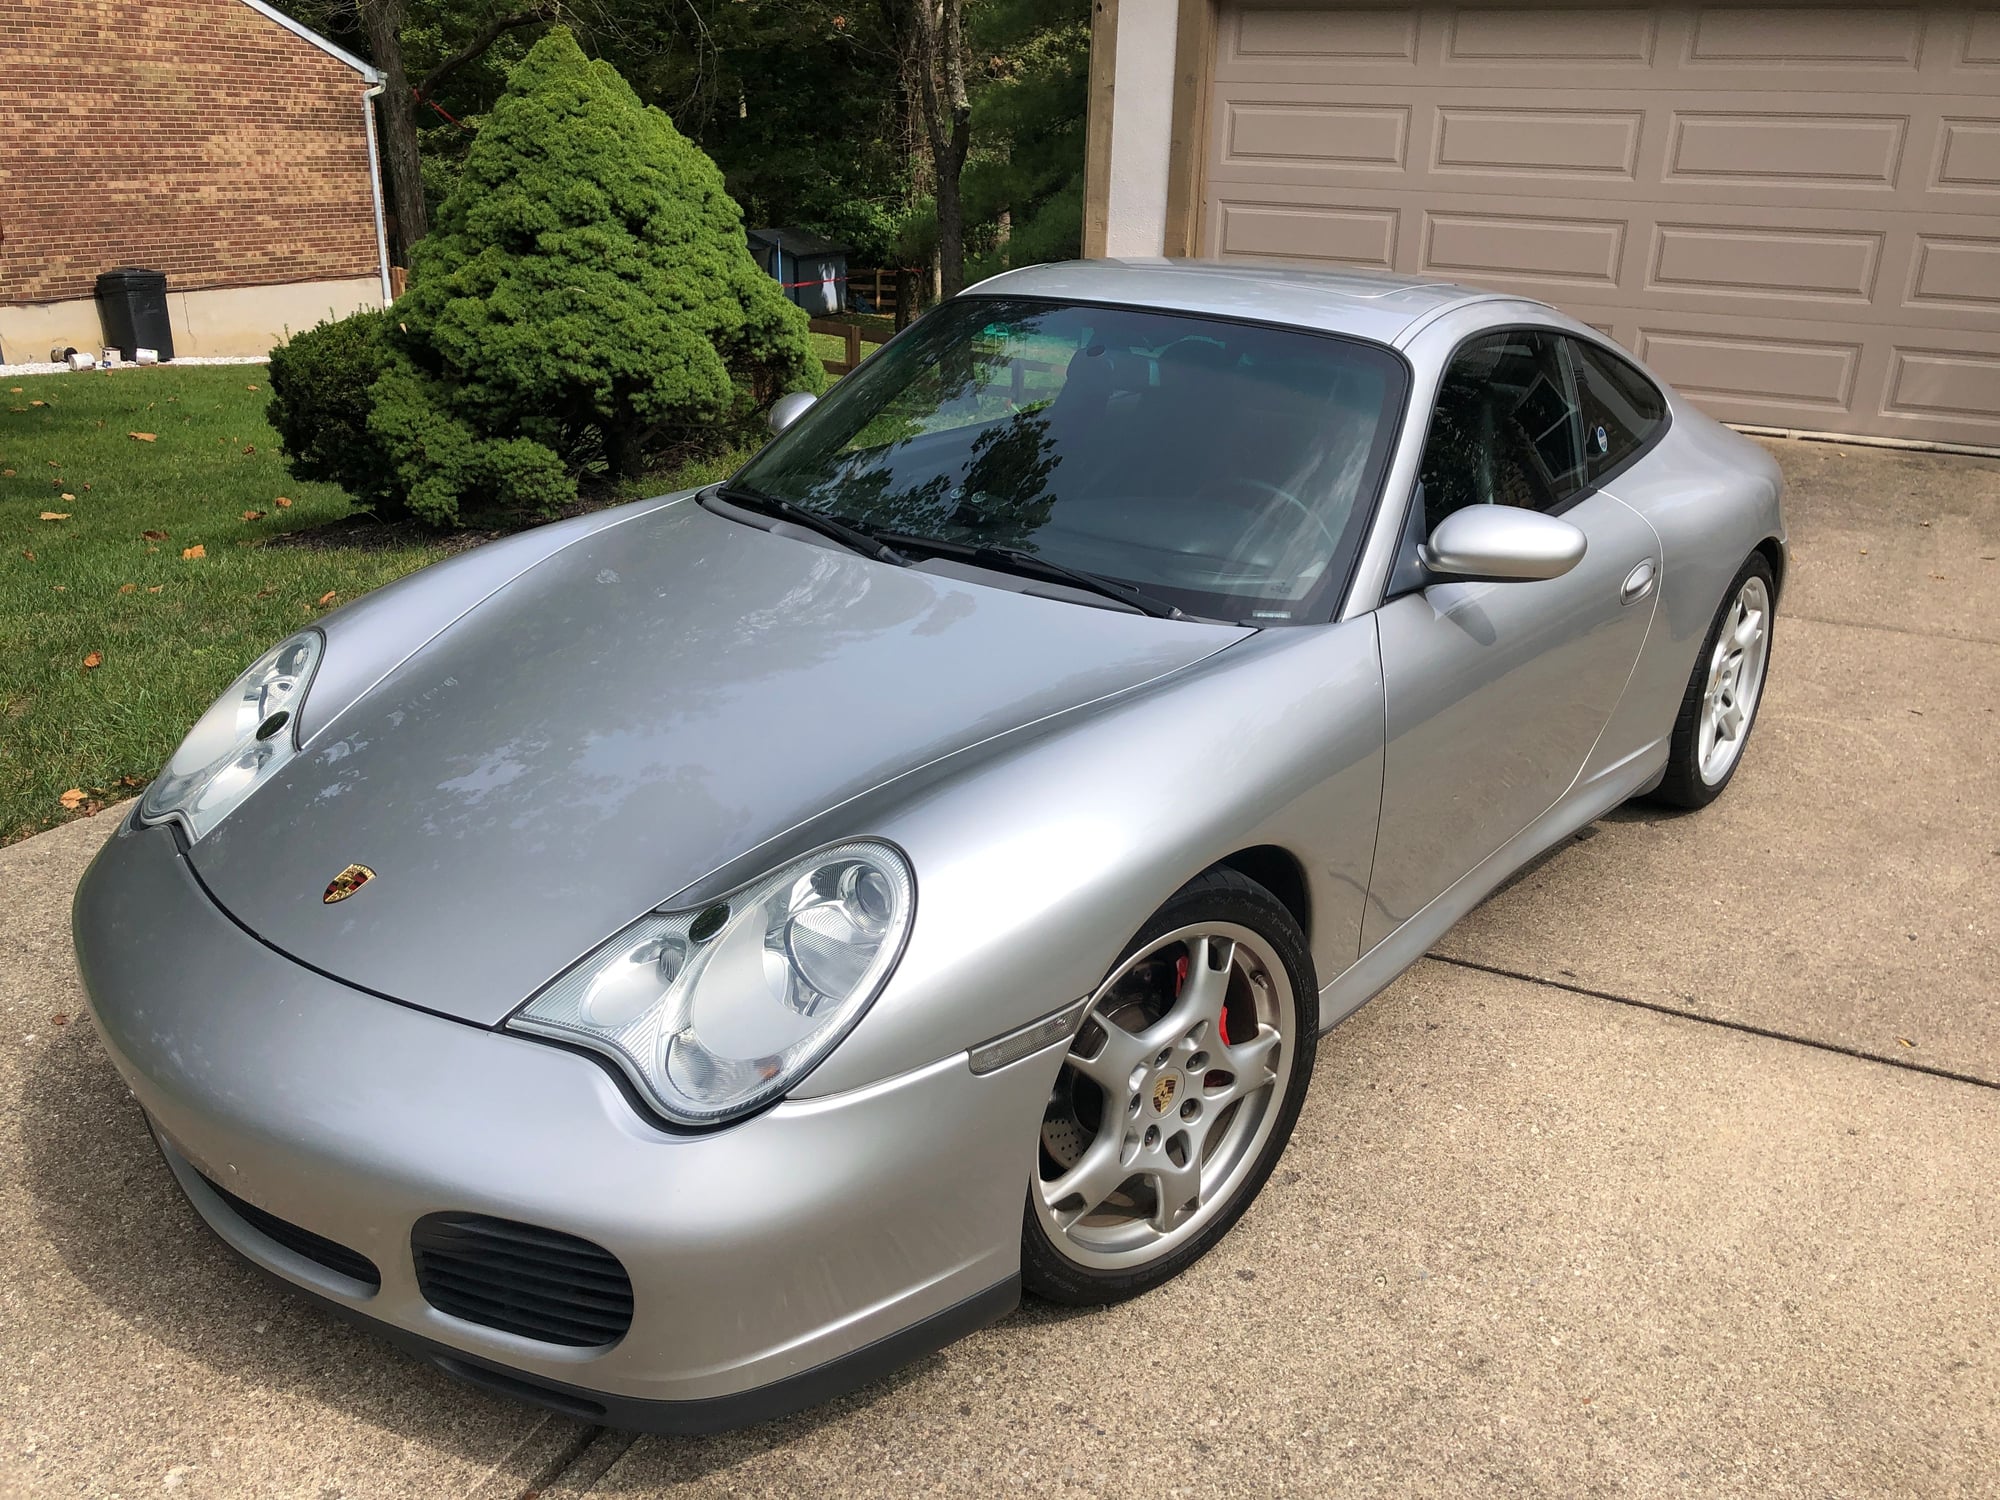 2003 Porsche 911 - Beautiful 2003 Porsche 911 Carrera 4S (6 speed, super clean) - Used - VIN WP0AA29993S623883 - 118,000 Miles - 6 cyl - AWD - Manual - Coupe - Silver - Cincinnati, OH 45245, United States